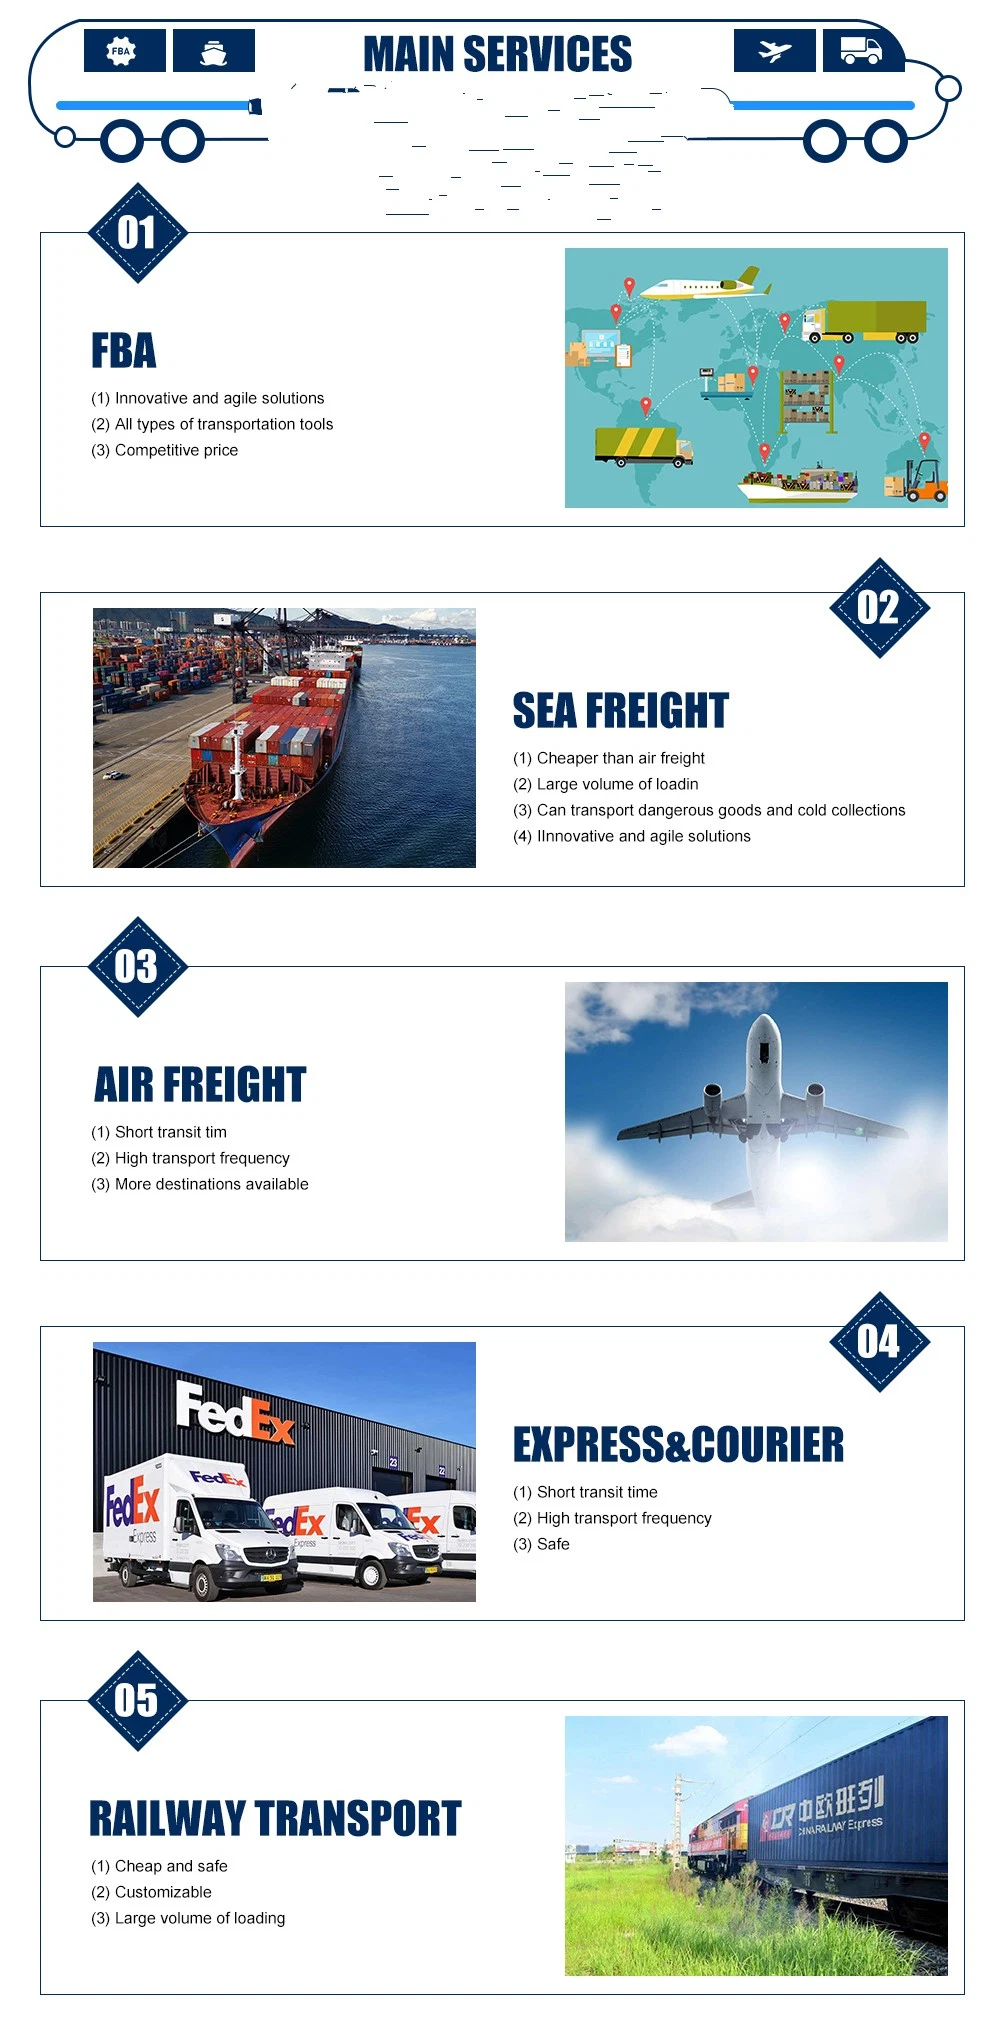 Freight Forwarder Air Shipping Agent to Spain Italy Belgium Denmark Logistics Door to Door Transport Services by Train Drop Sea Shipping